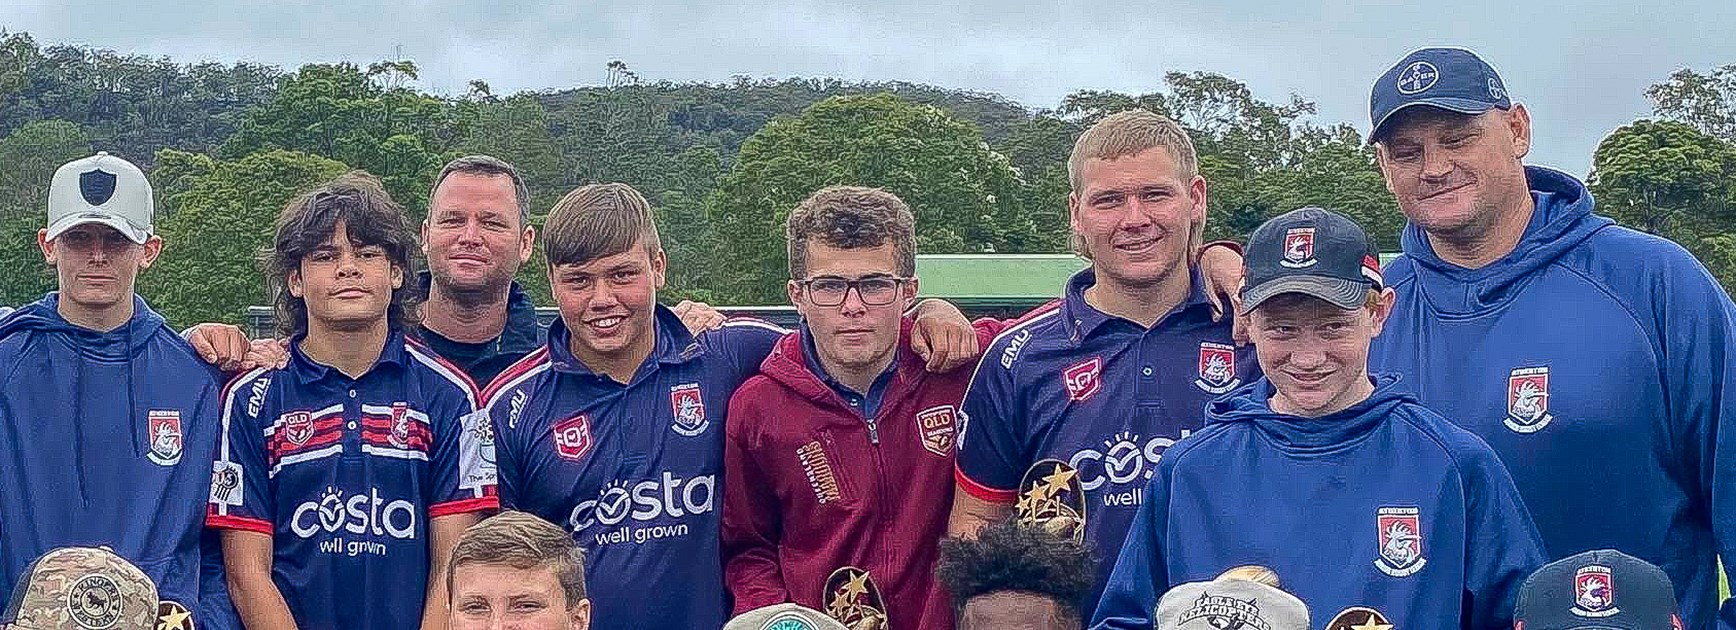 Andrew Beazley, pictured in the QLD Maroons jumper, with his teammates from the Atherton Roosters. Photo: Atherton Roosters JRL Facebook.